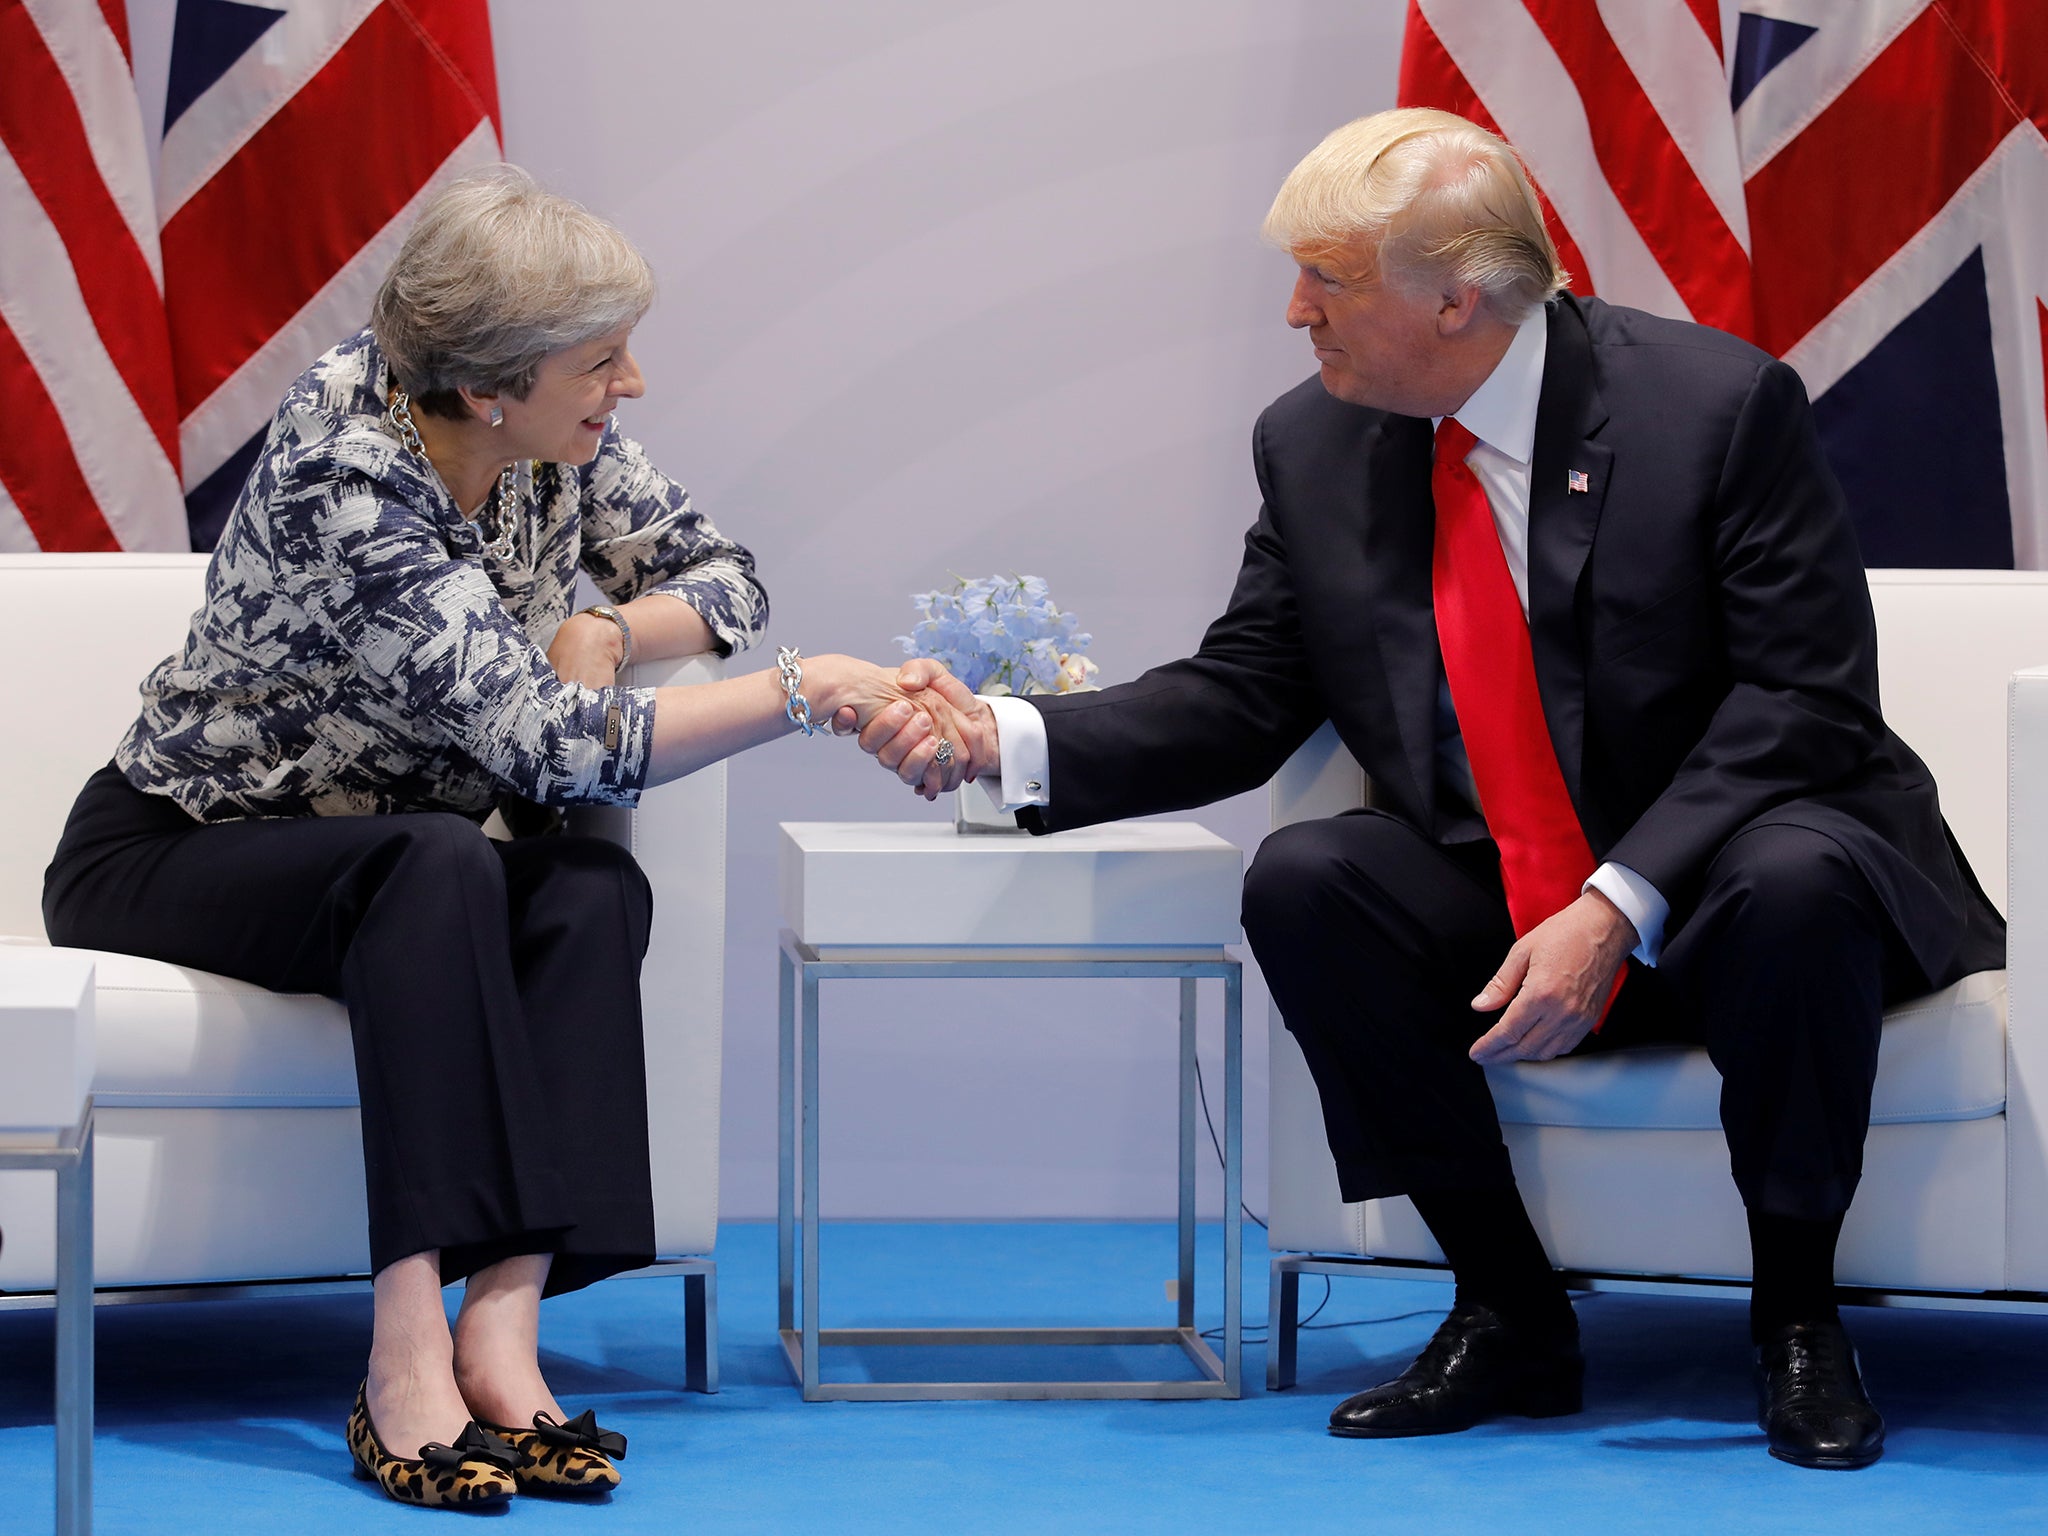 If it were not for the ‘special relationship’, the Prime Minister might not have felt the need to condemn the US President in a public utterance